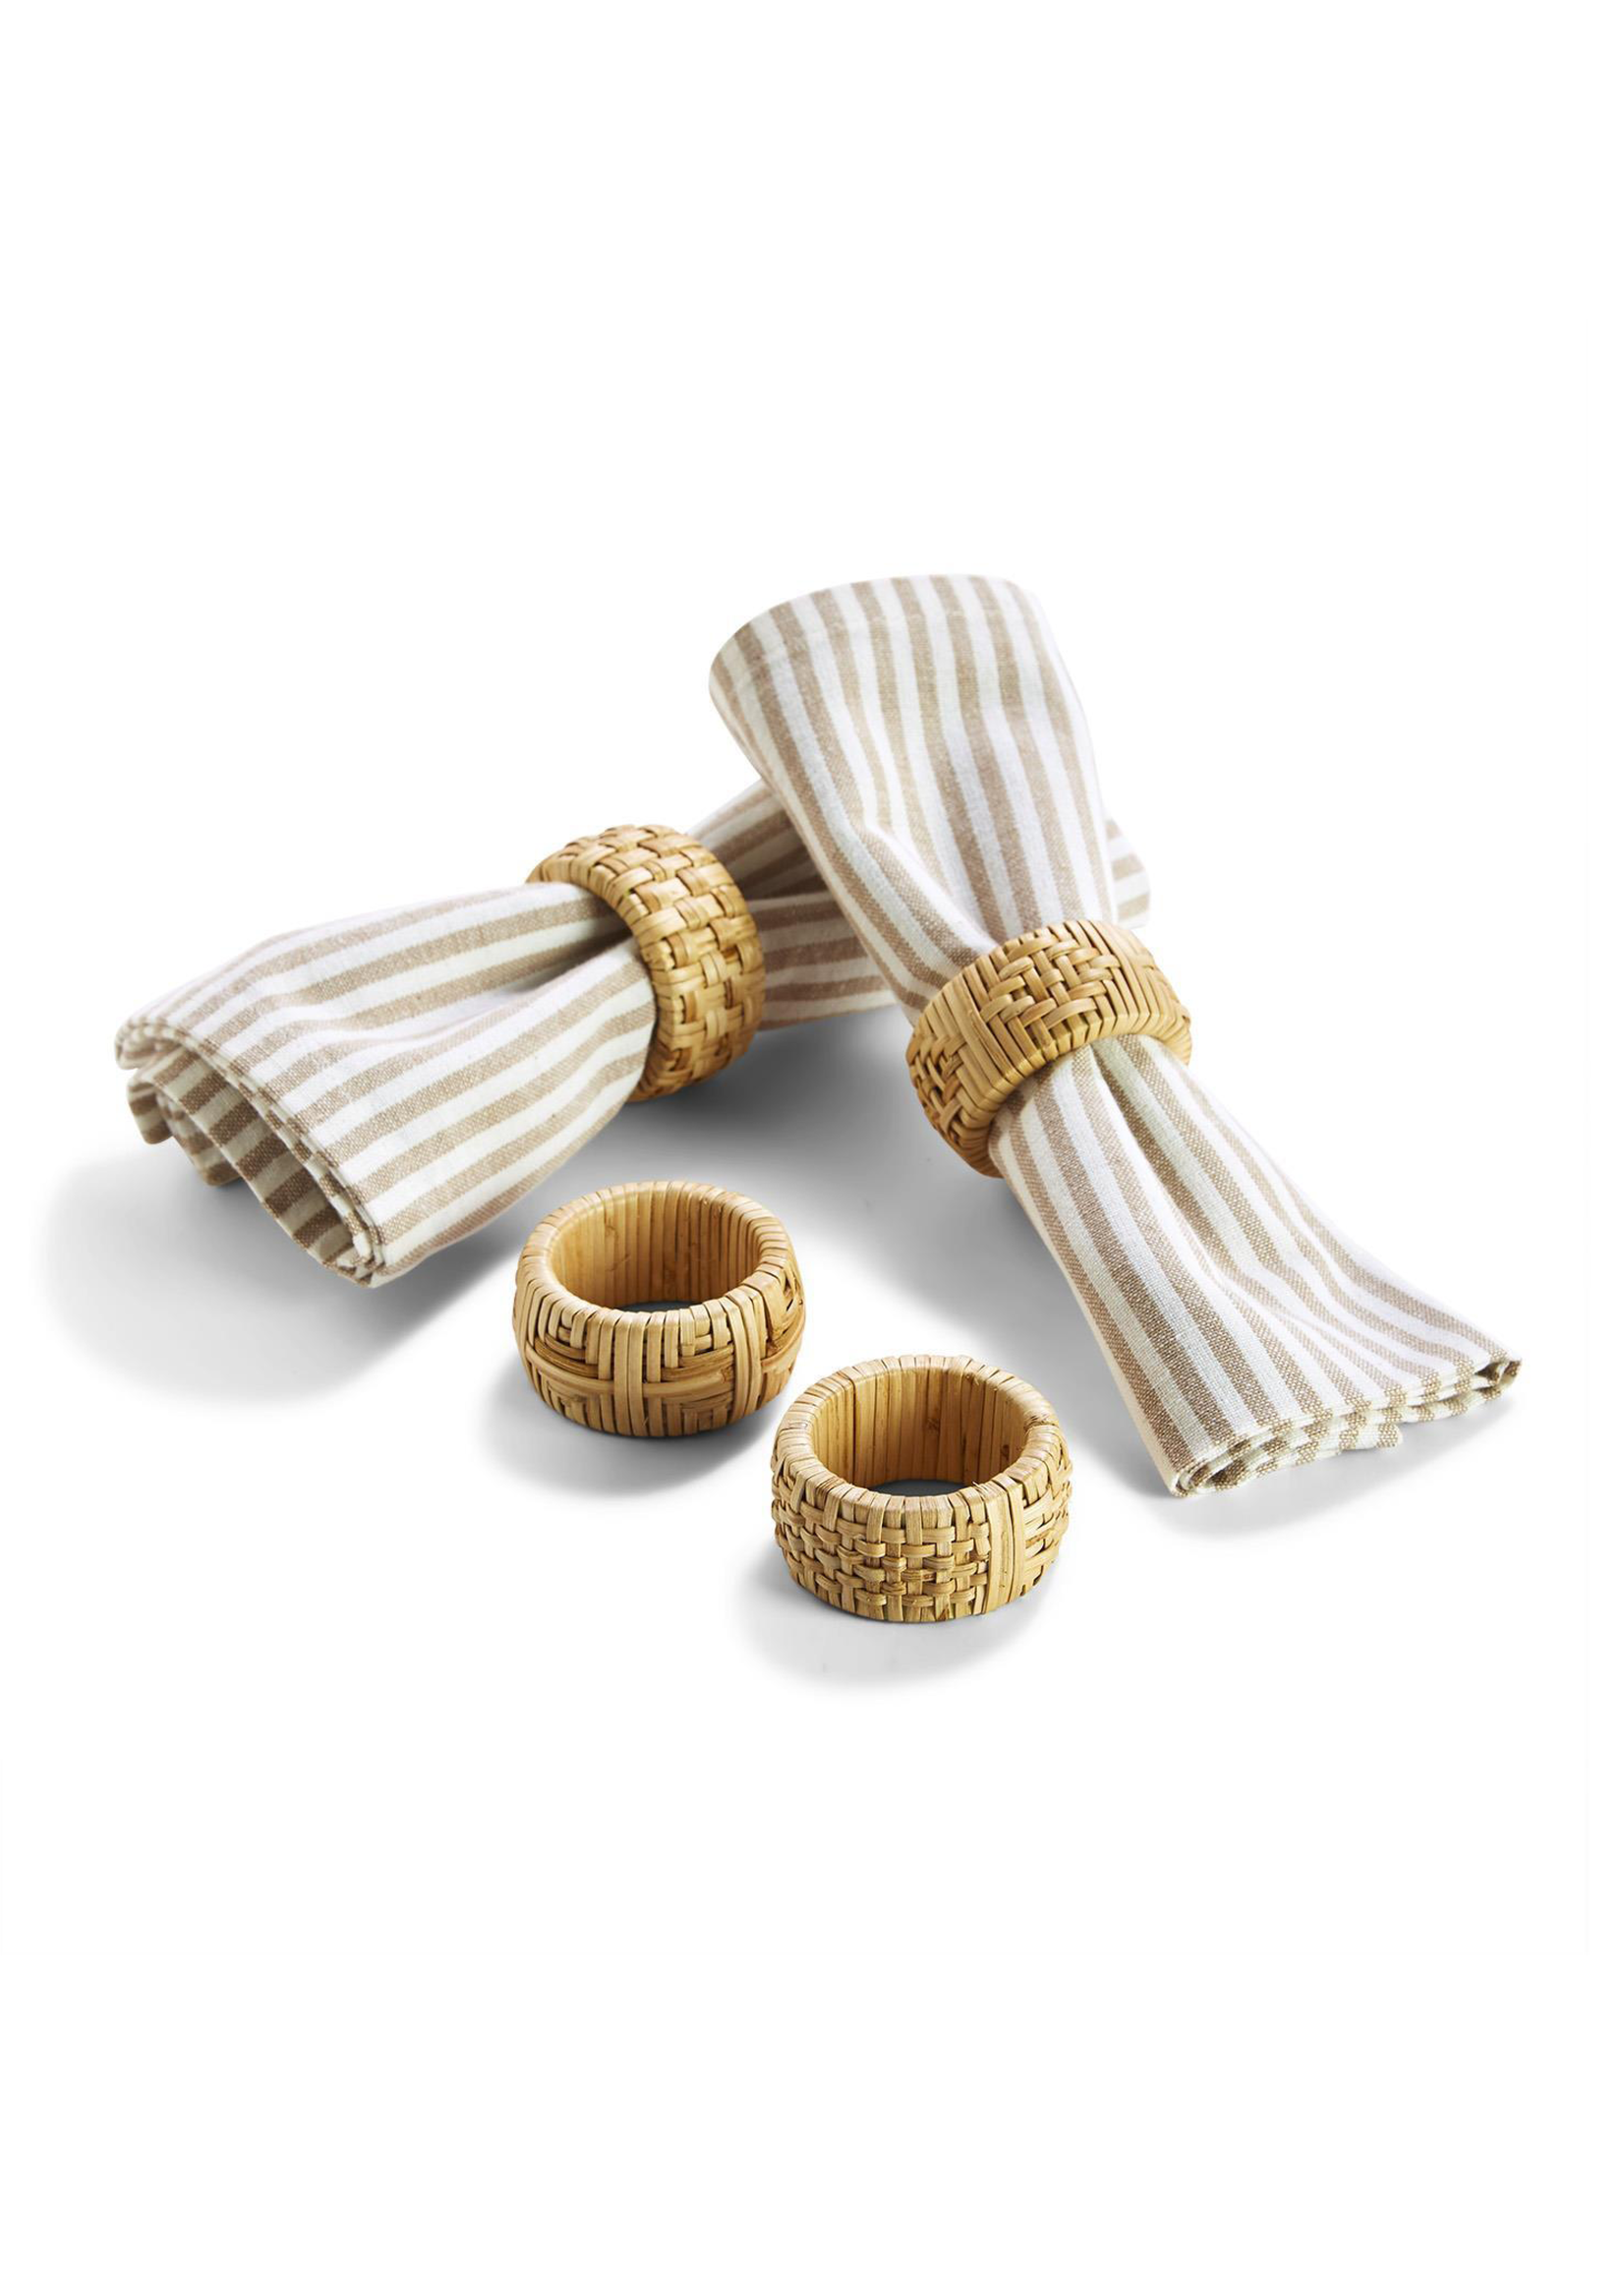 Two's Company, Inc. Cane Napkin Rings, Set of 4